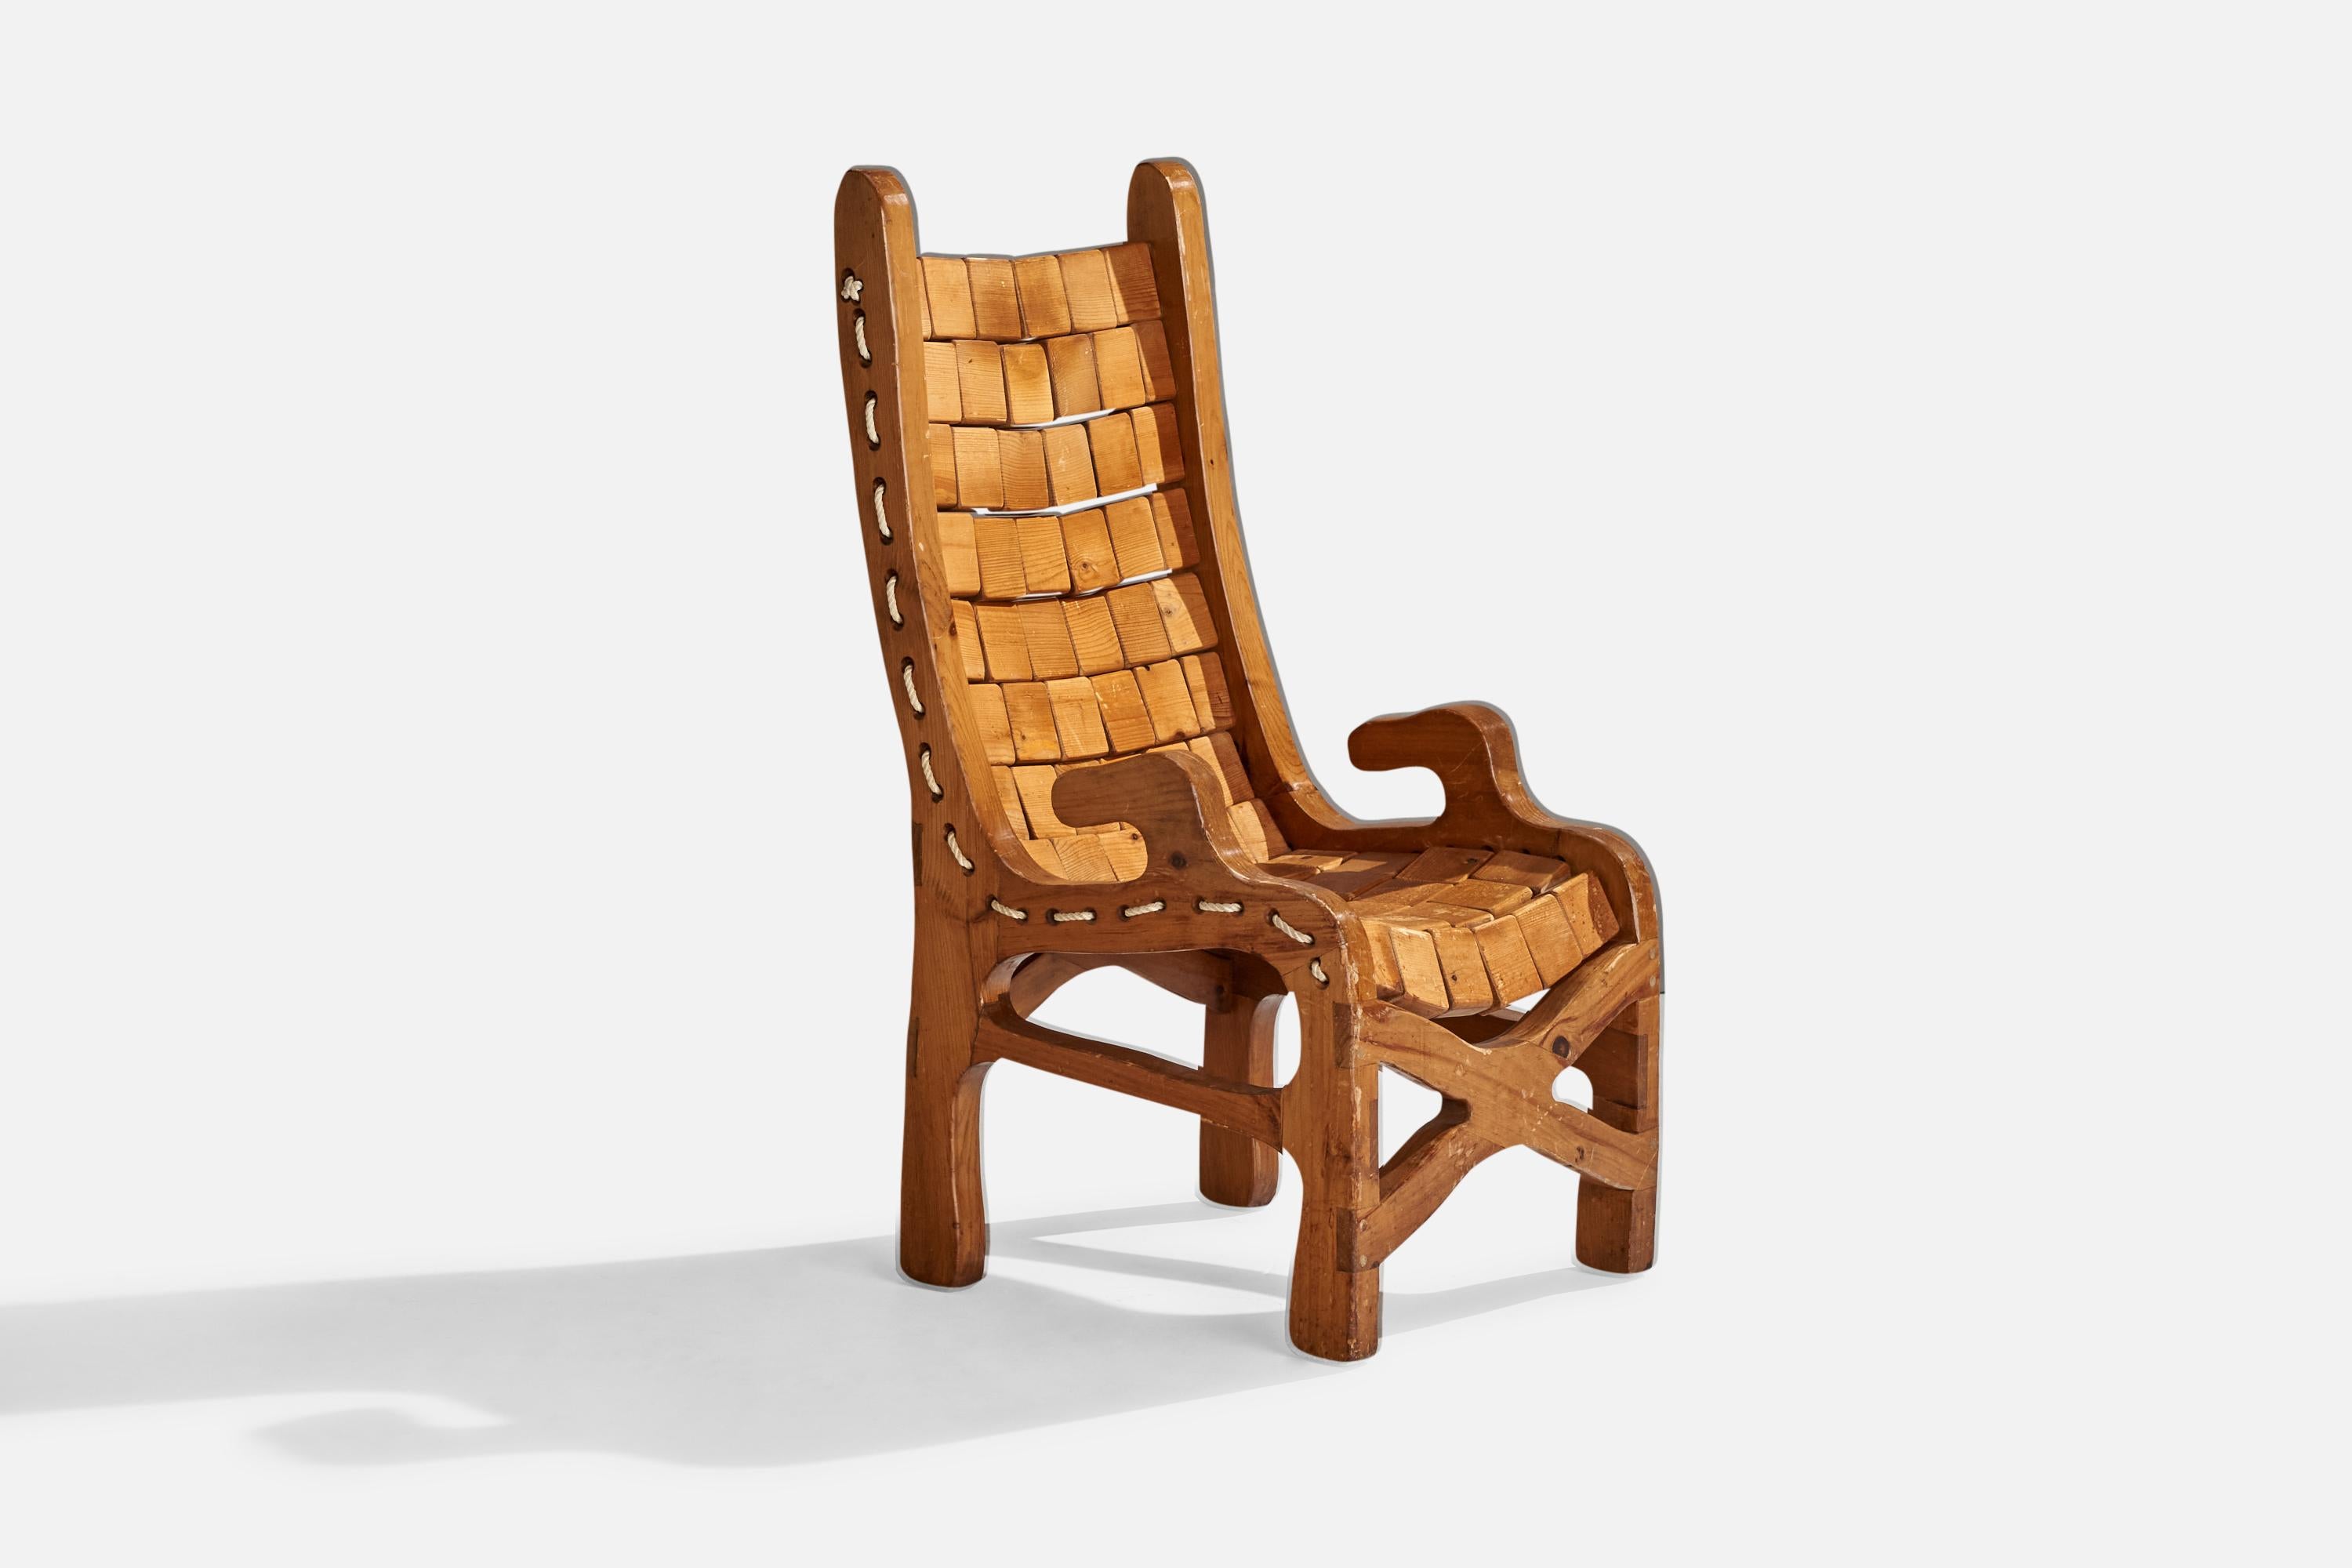 A pine and cord armchair designed and produced in the US, c. 1970s.

Seat height: 17.25